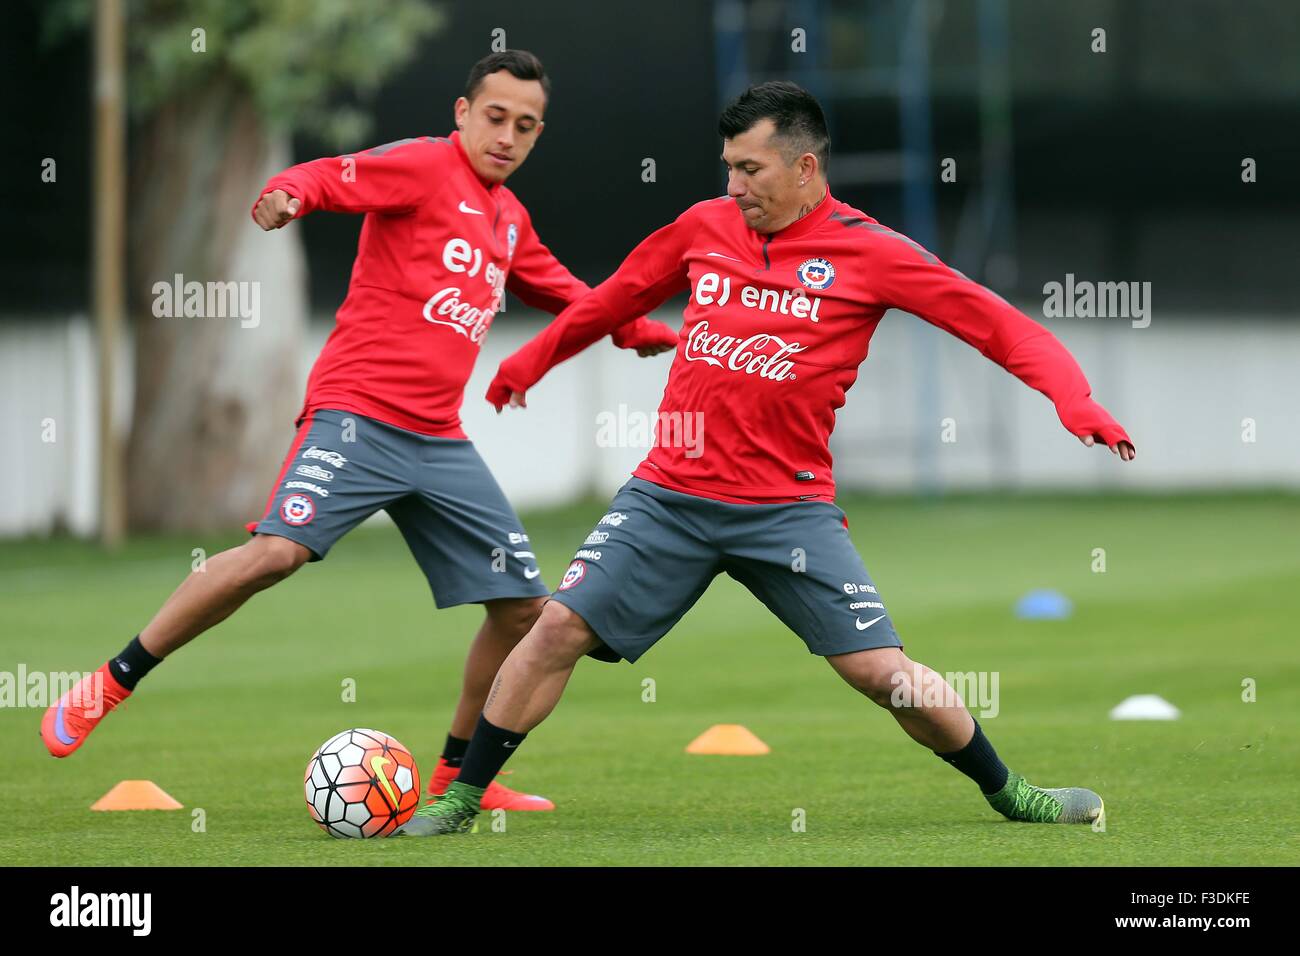 Santiago, Chile. 5th Oct, 2015. Image provided by the National Professional Soccer Association shows Fabian Orellana (L) and Gary Medel of Chile's national soccer team taking part in a training session in Santiago, capital of Chile, Oct. 5, 2015. Chile will play with Brazil on Oct. 8 in a qualifying match for the FIFA Russia 2018 World Cup finals. © ANFP/Xinhua/Alamy Live News Stock Photo